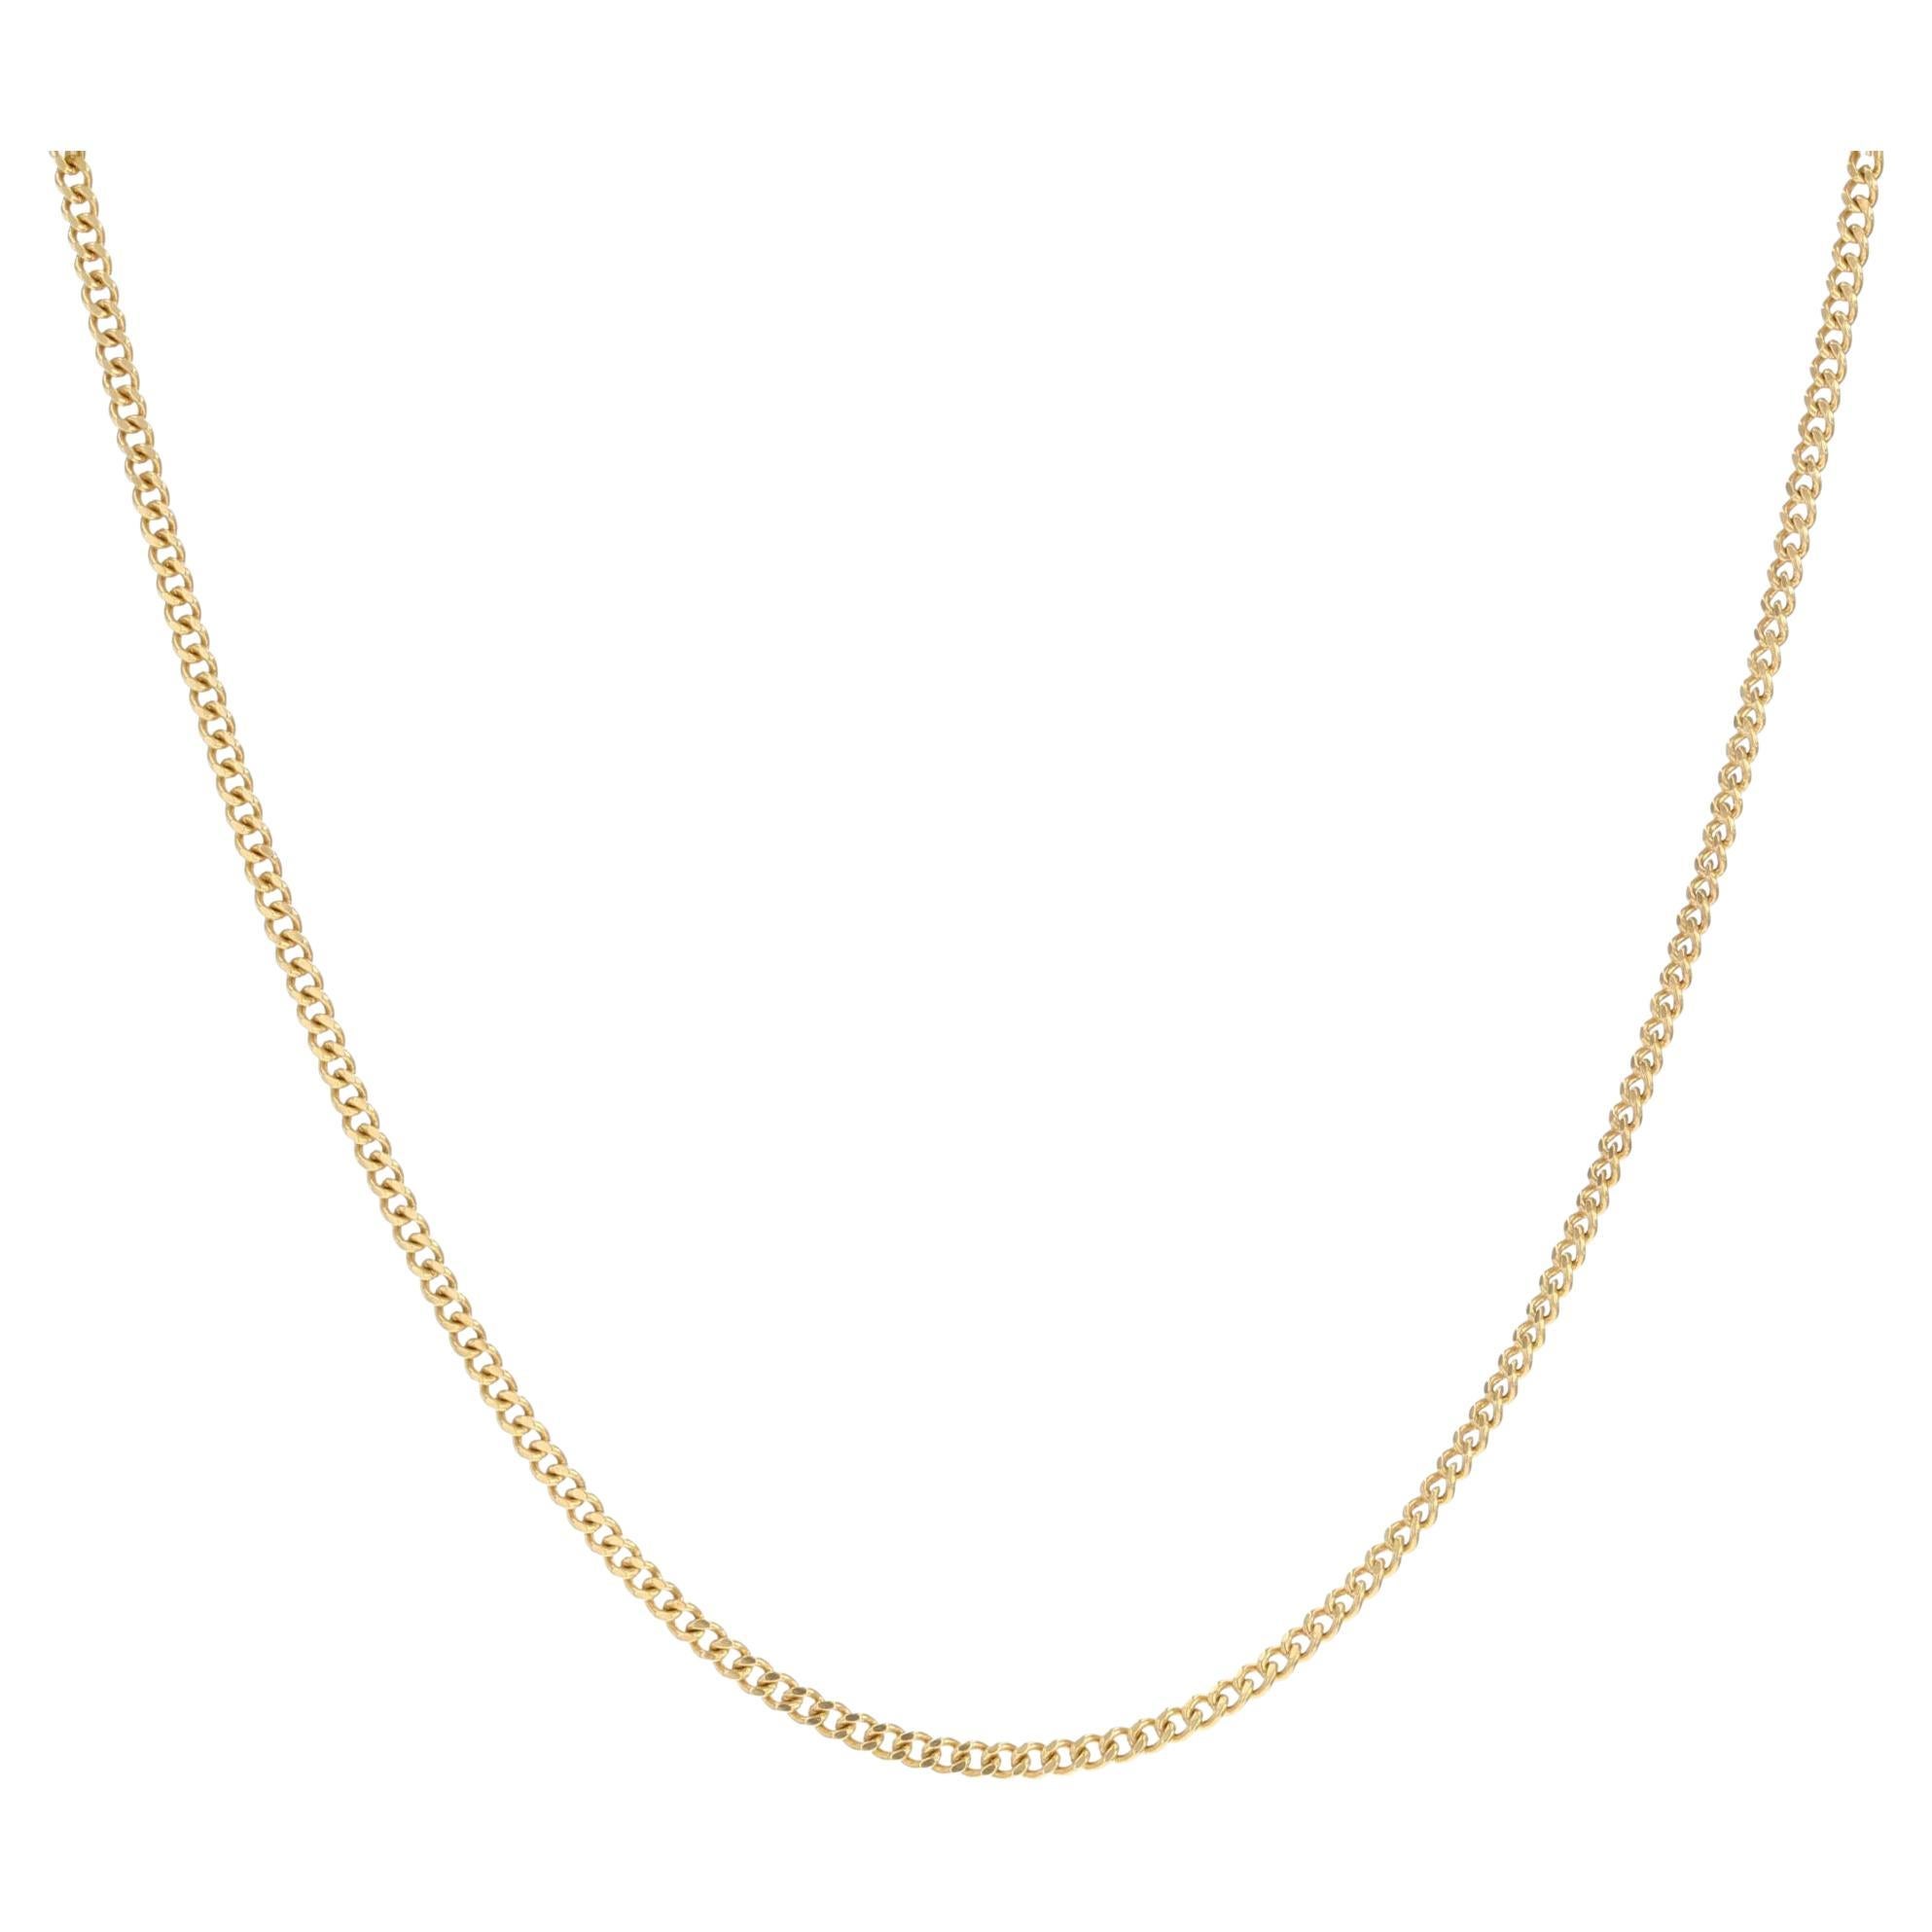 Modern  French 18 Karat Yellow Gold Filled Curb Mesh Chain Necklace